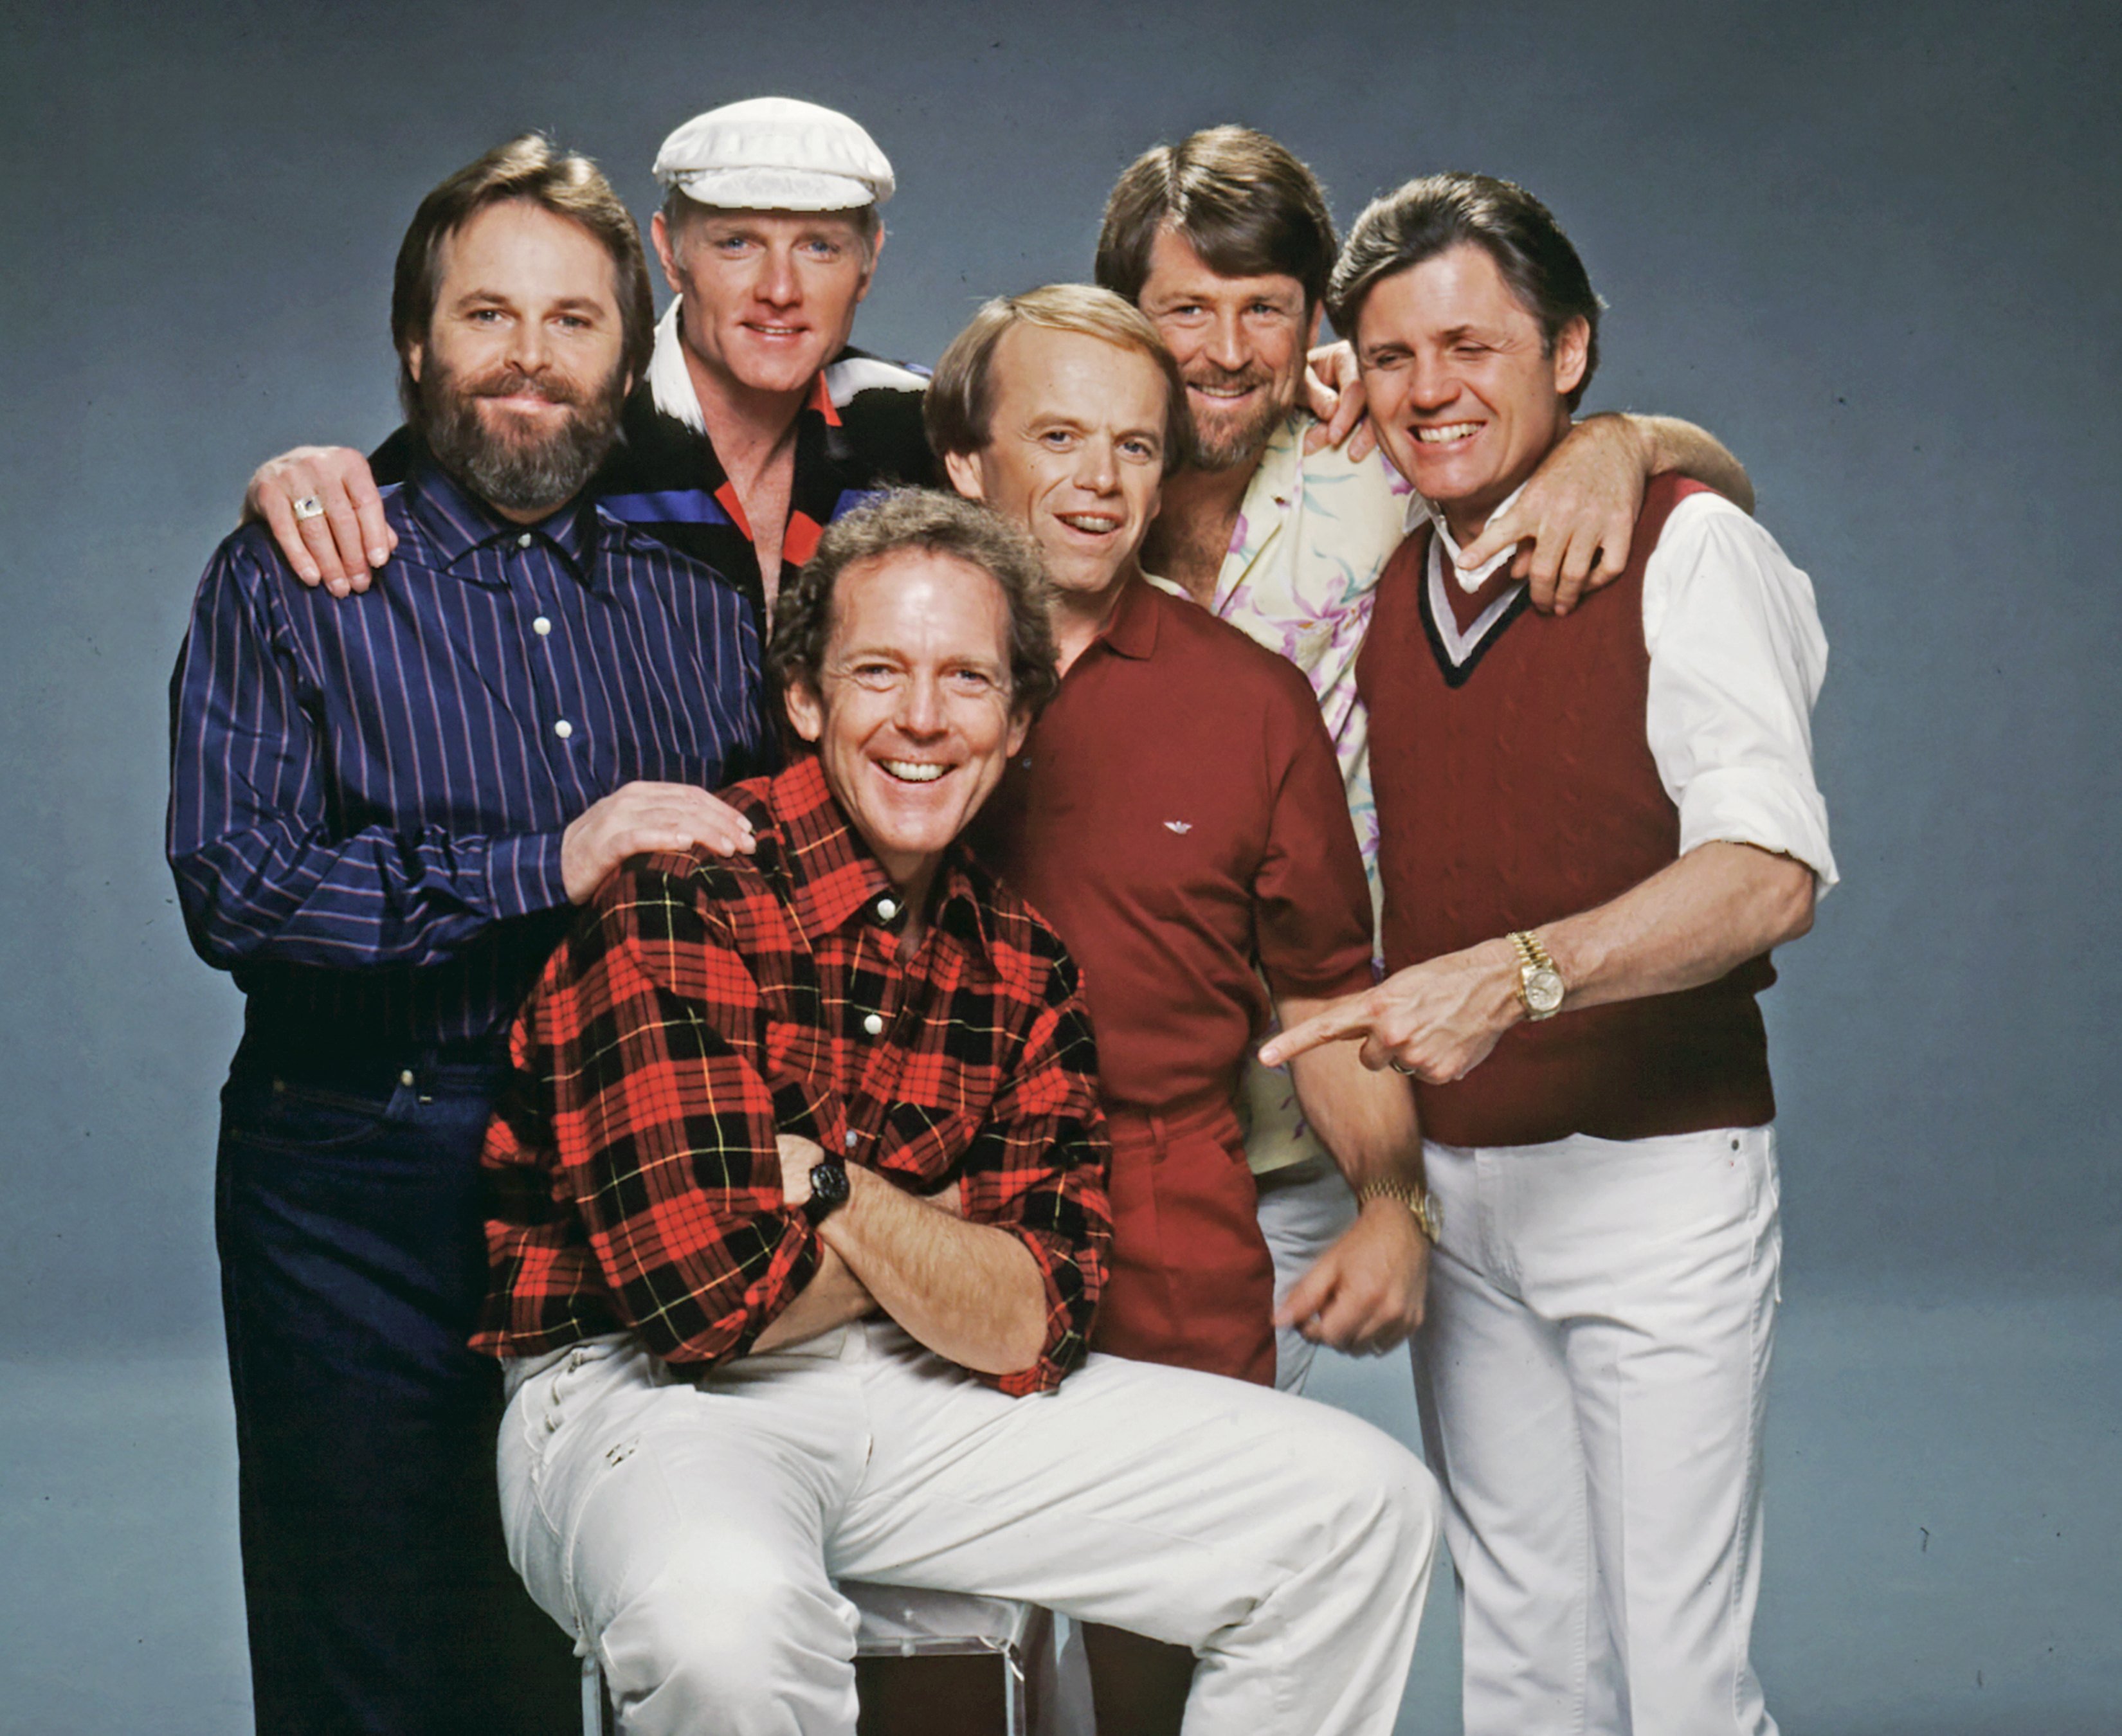 Harry Langdon poses for a portrait with the Beach Boys including Carl Wilson, Mike Love, Al Jardine, Brian Wilson, and Bruce Johnston